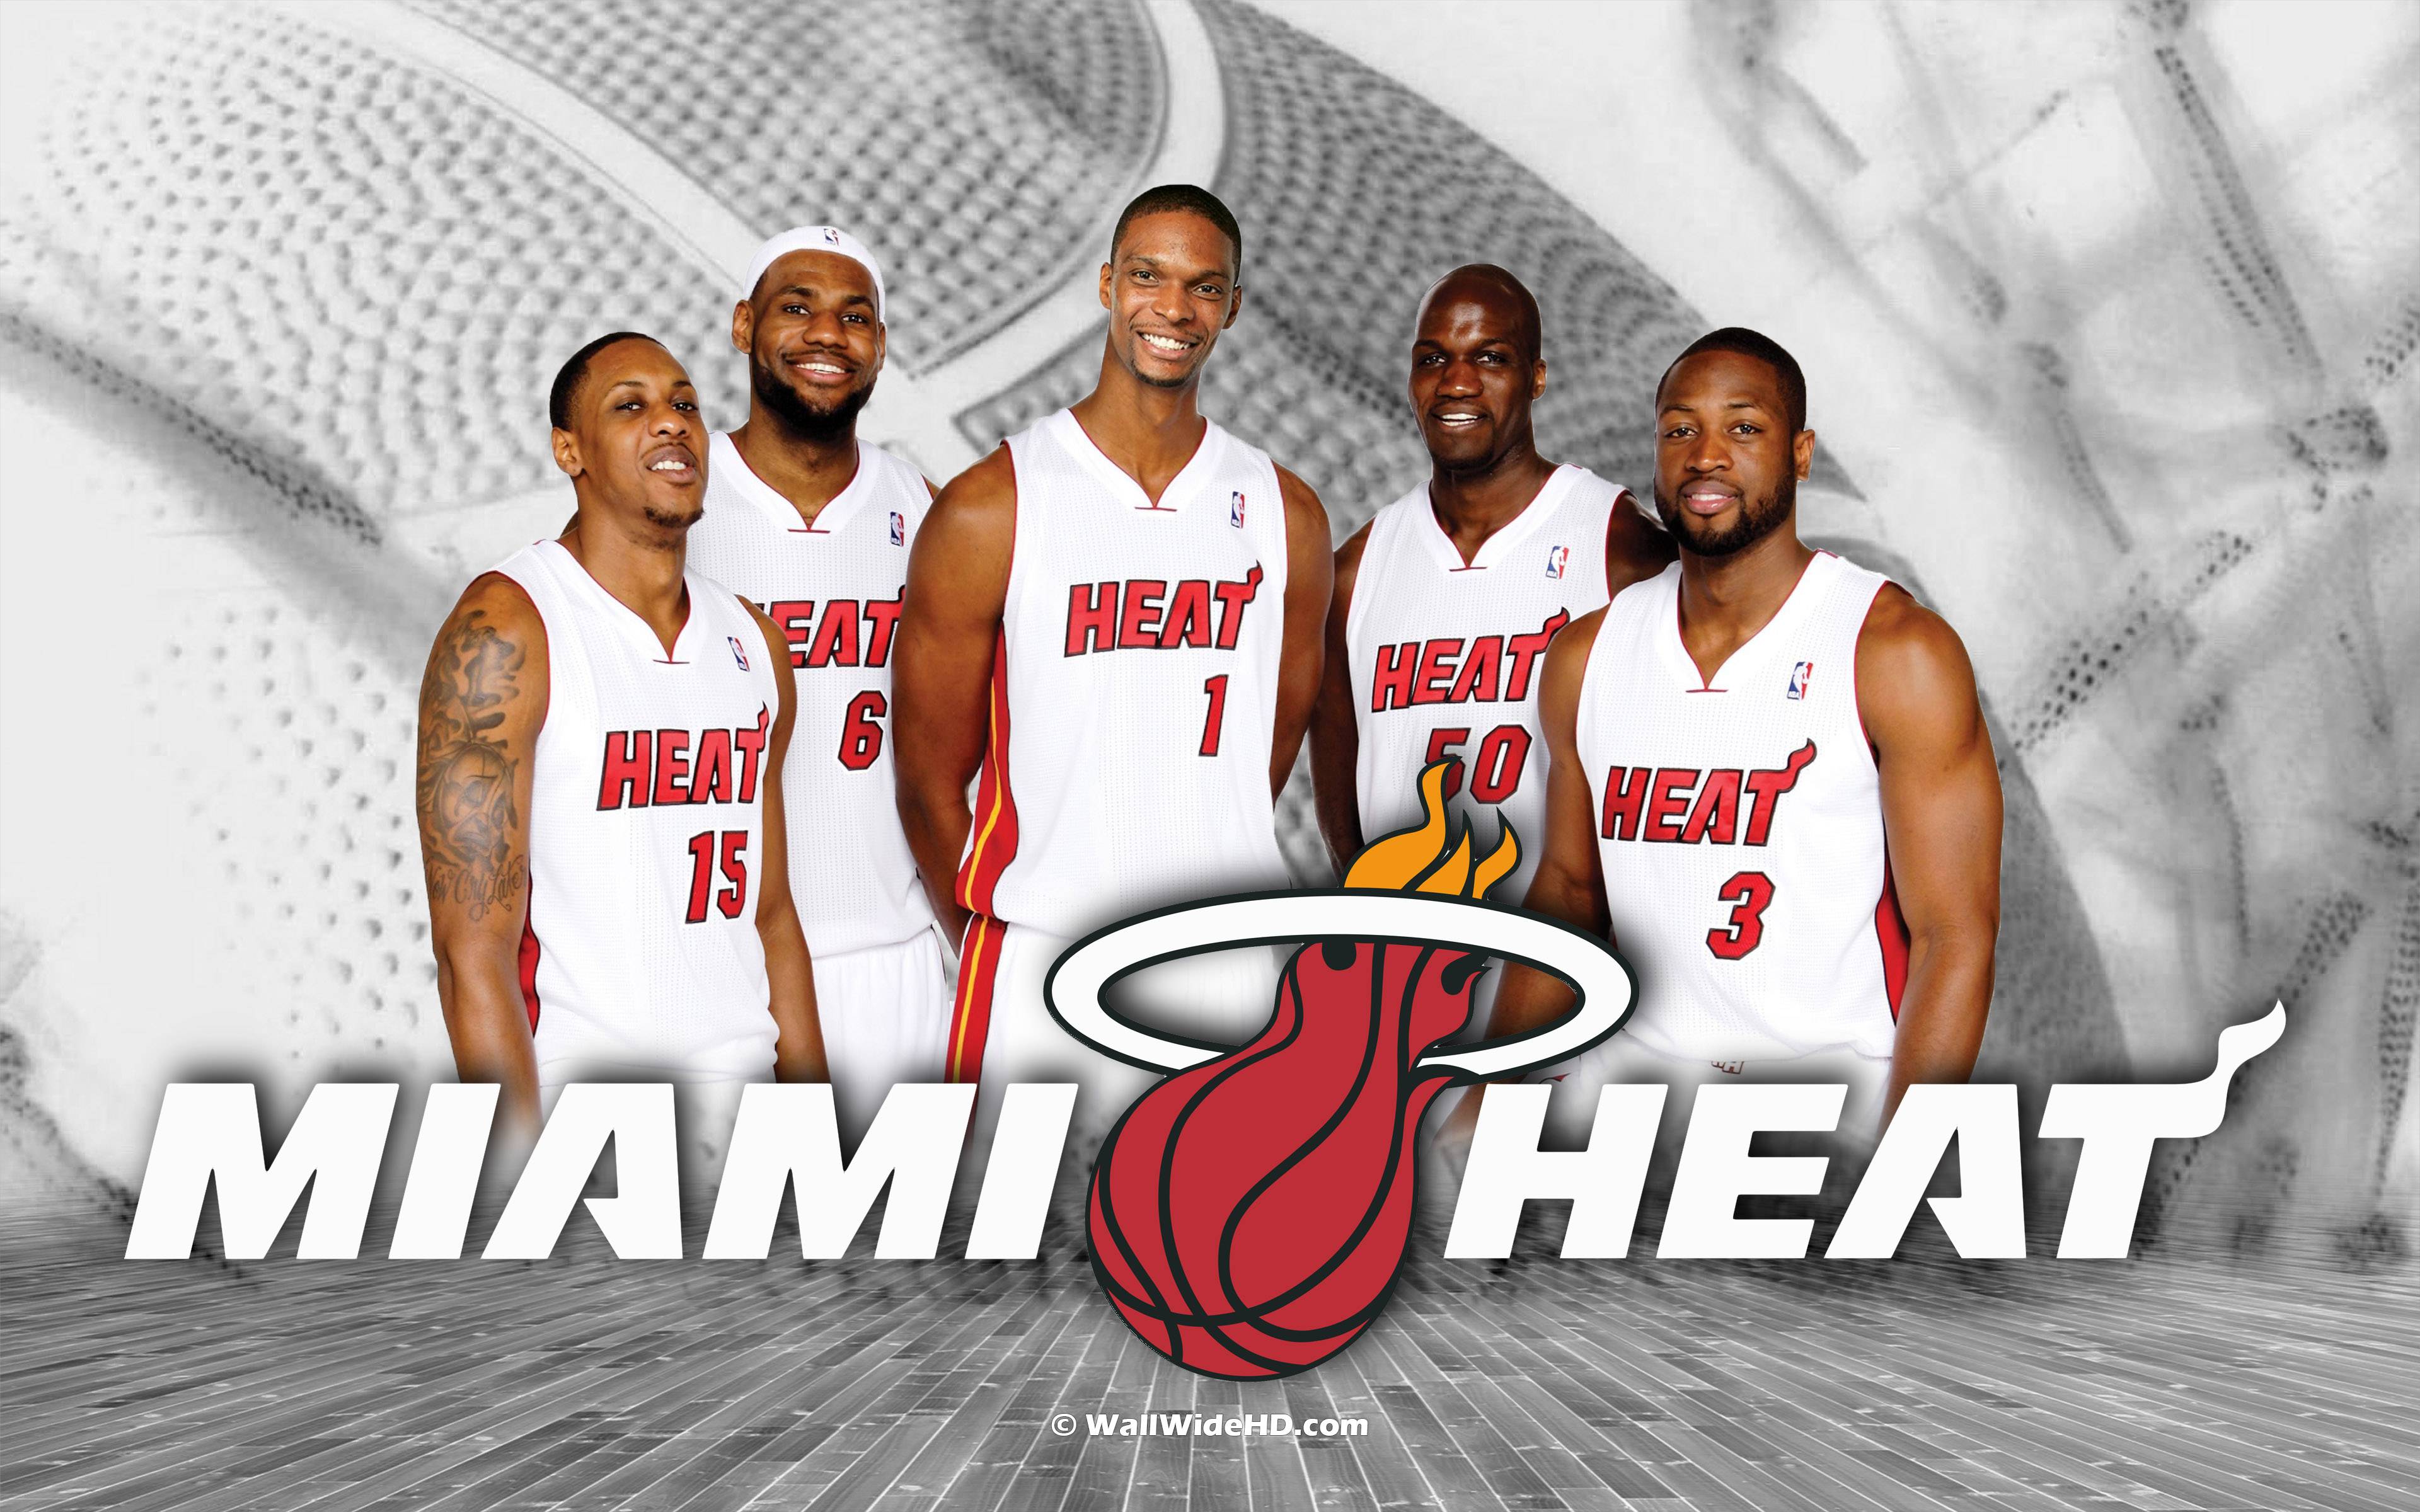 Free download Miami Heat HD Wallpapers 2015 [3840x2400] for your